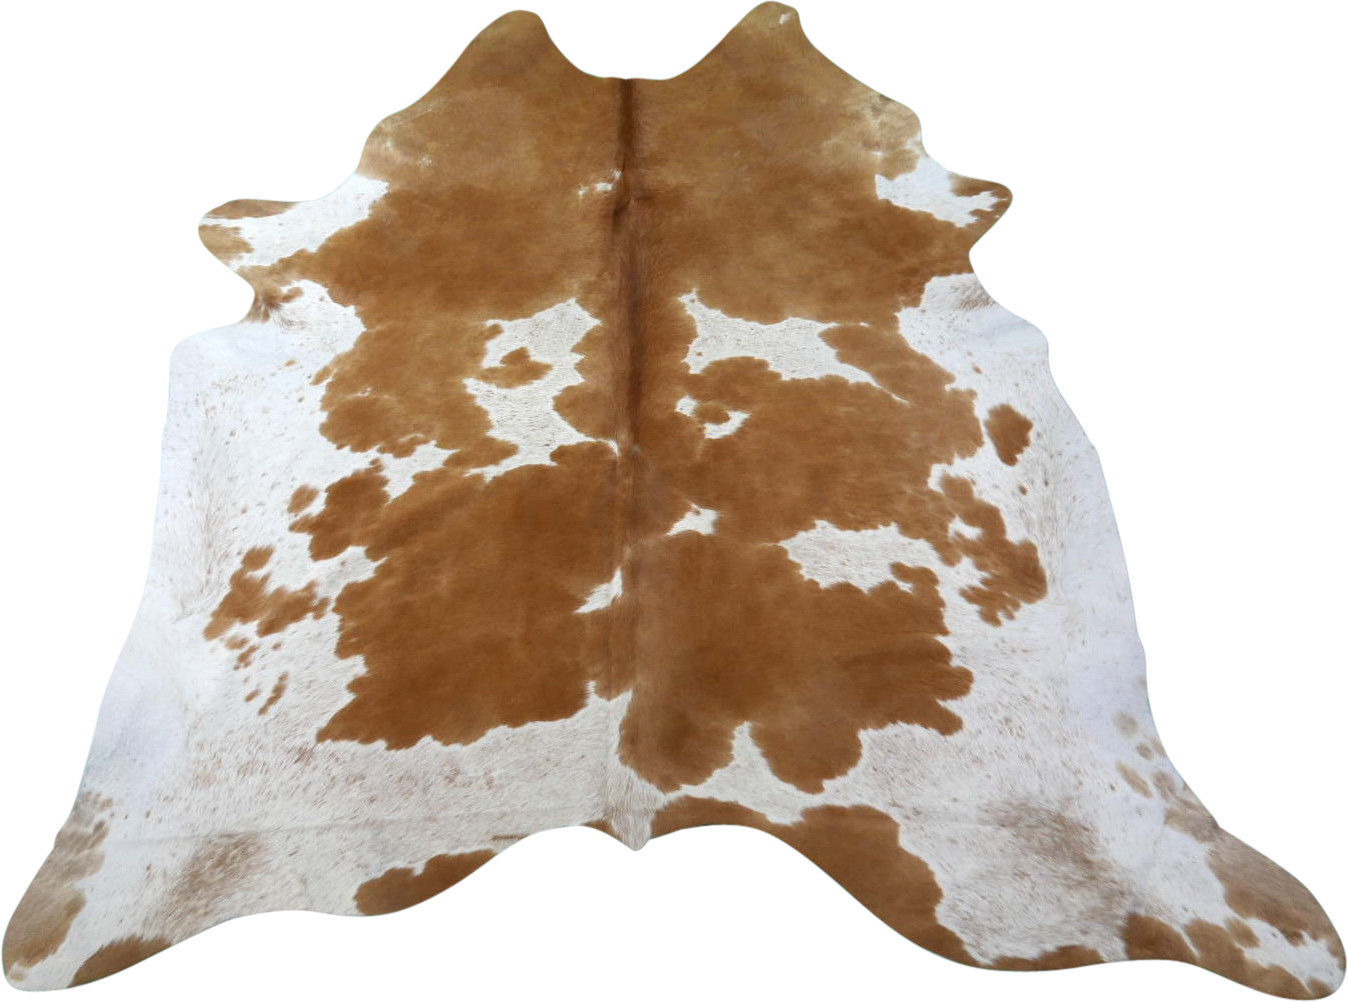 Primary image for Brown and White Cowhide Rug Size: 6.7 X 6.5' Brown & White Hide Skin Rug M-283